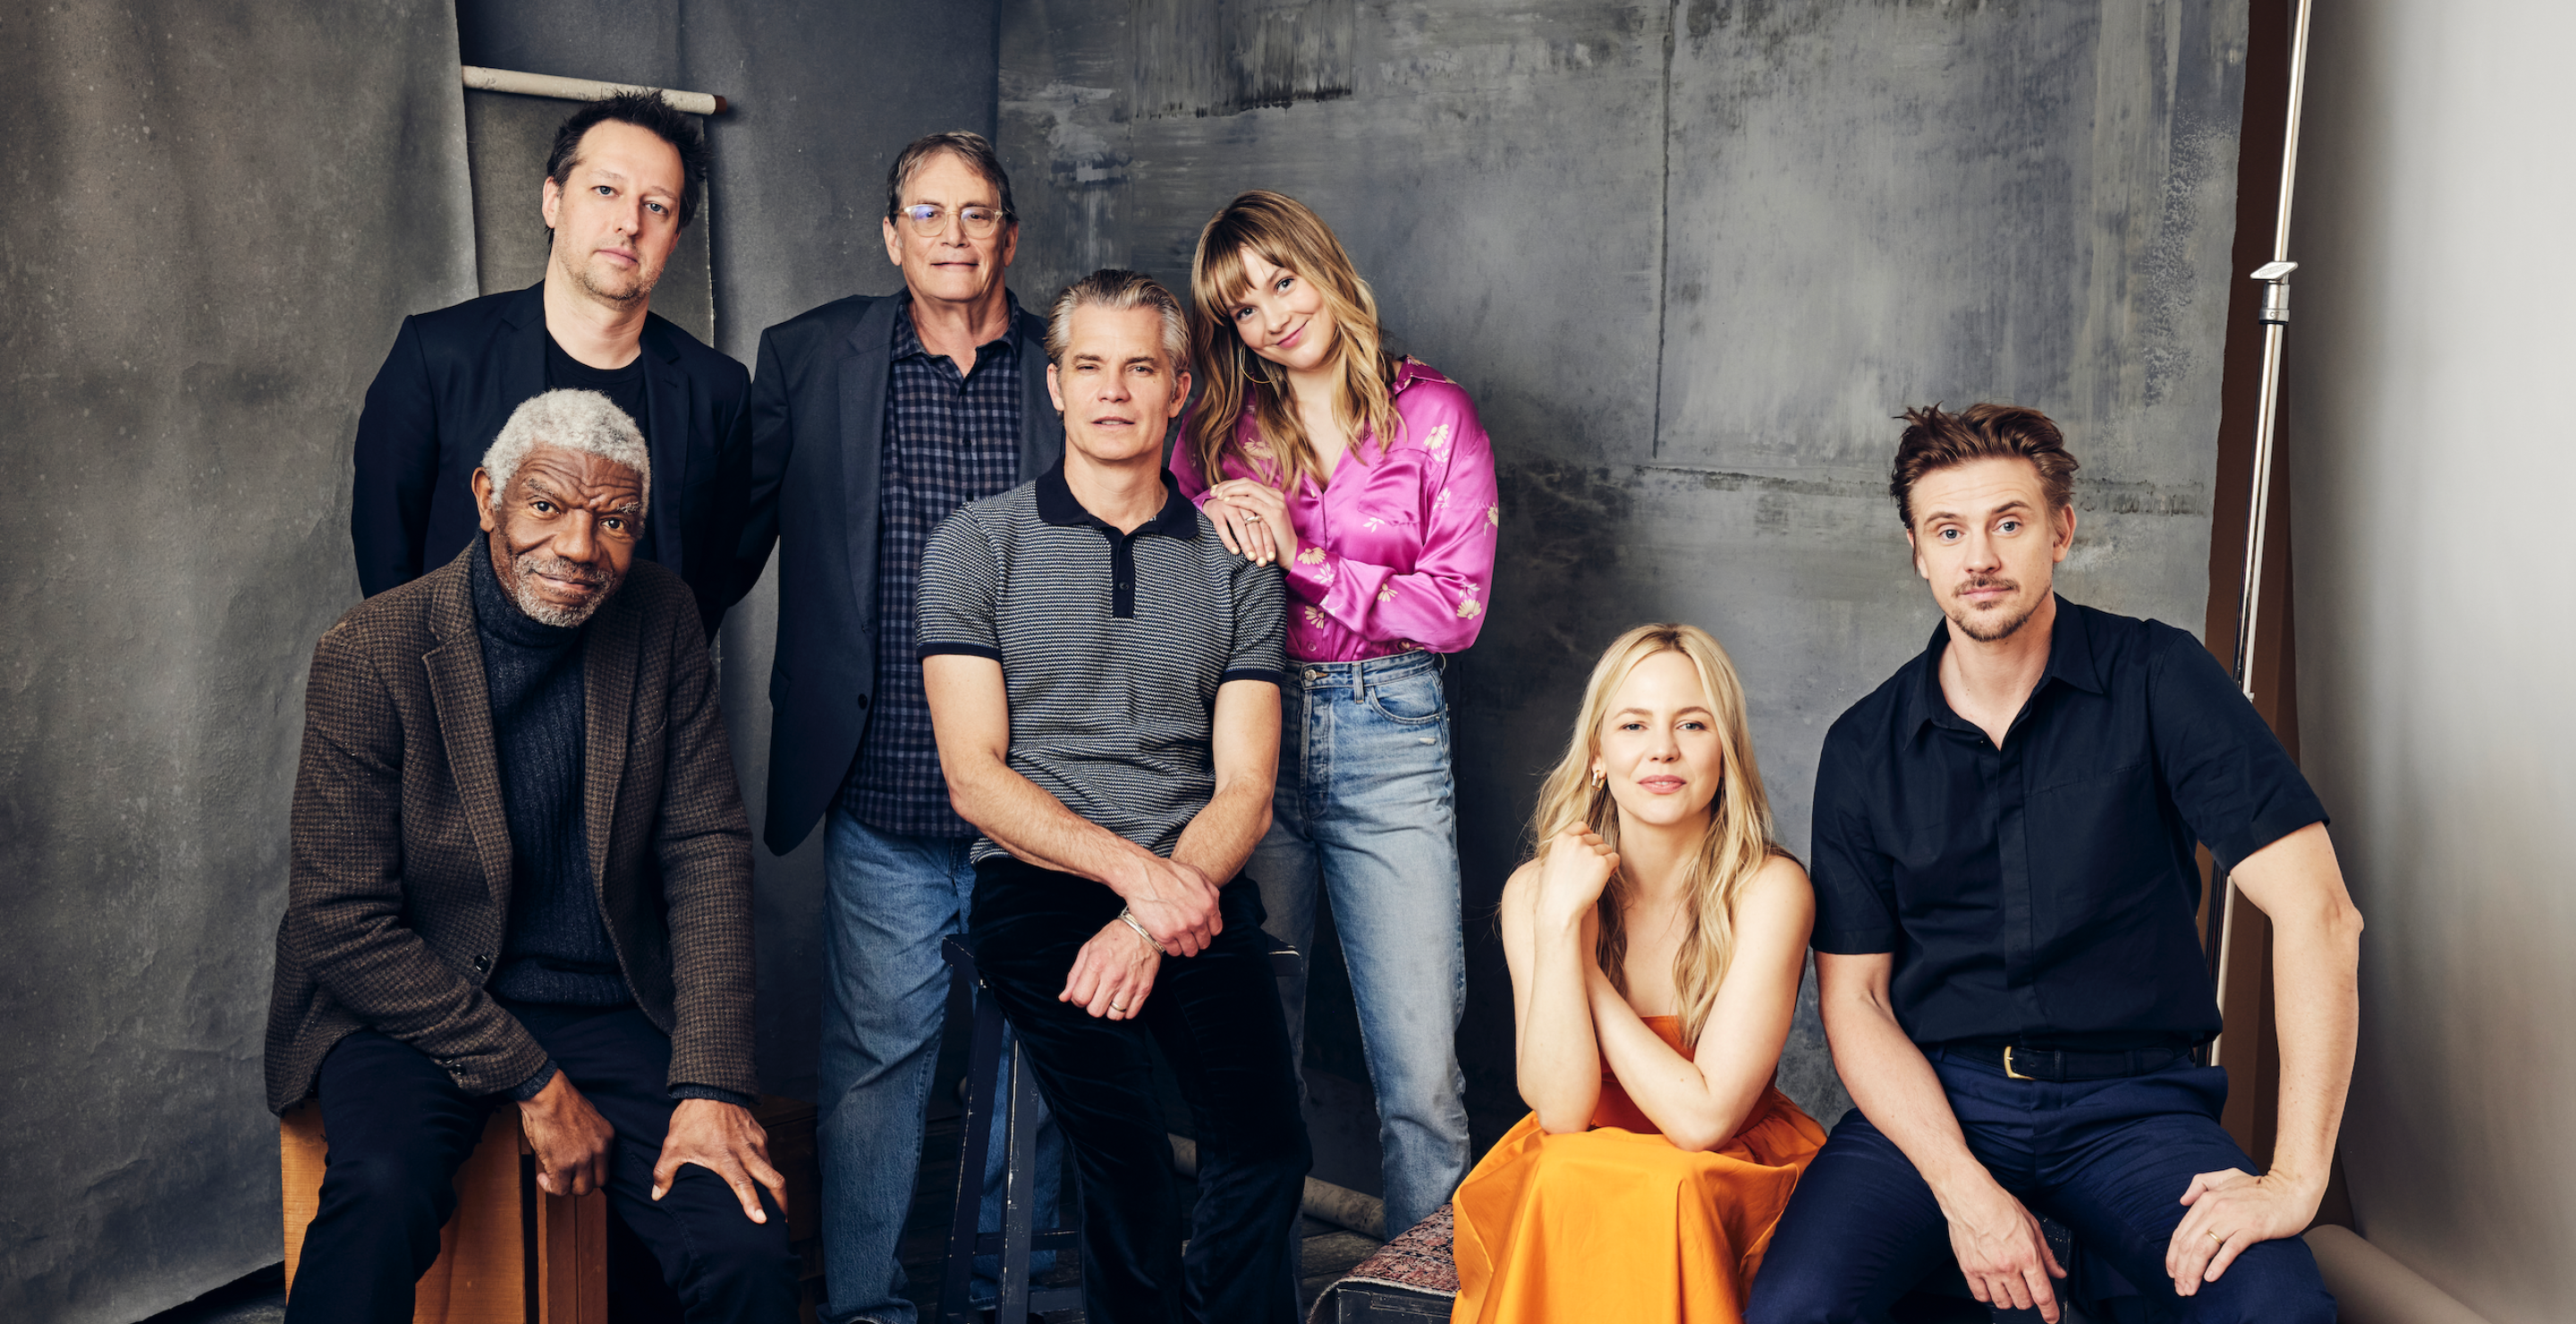 Justified City Primeval': Meet the Cast of the 'Justified' Spinoff